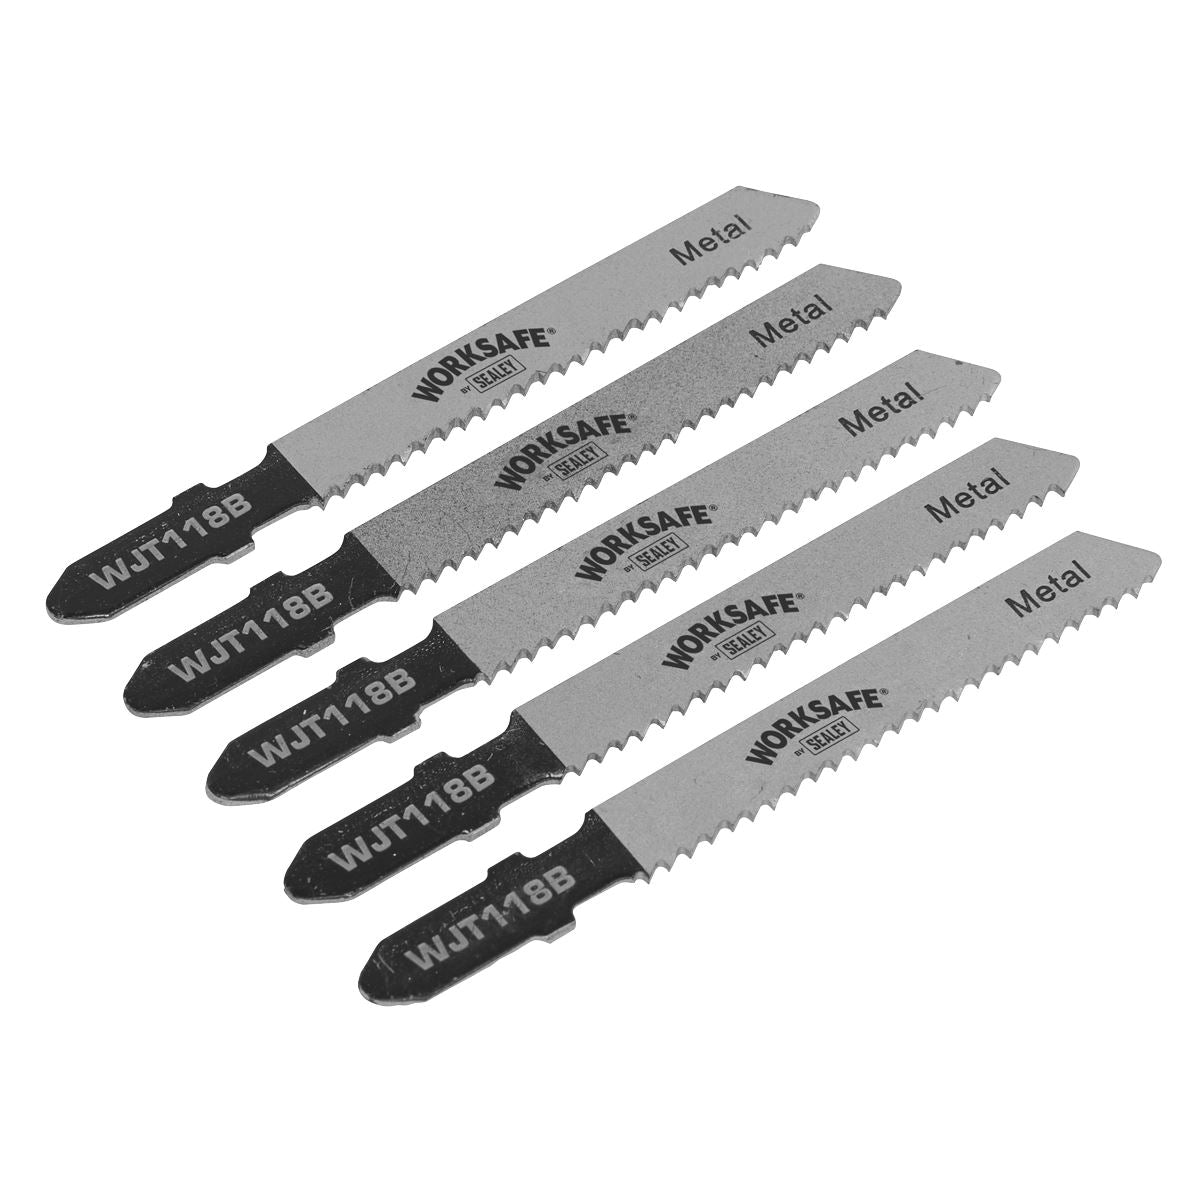 Worksafe by Sealey Jigsaw Blade Metal 55mm 12tpi - Pack of 5